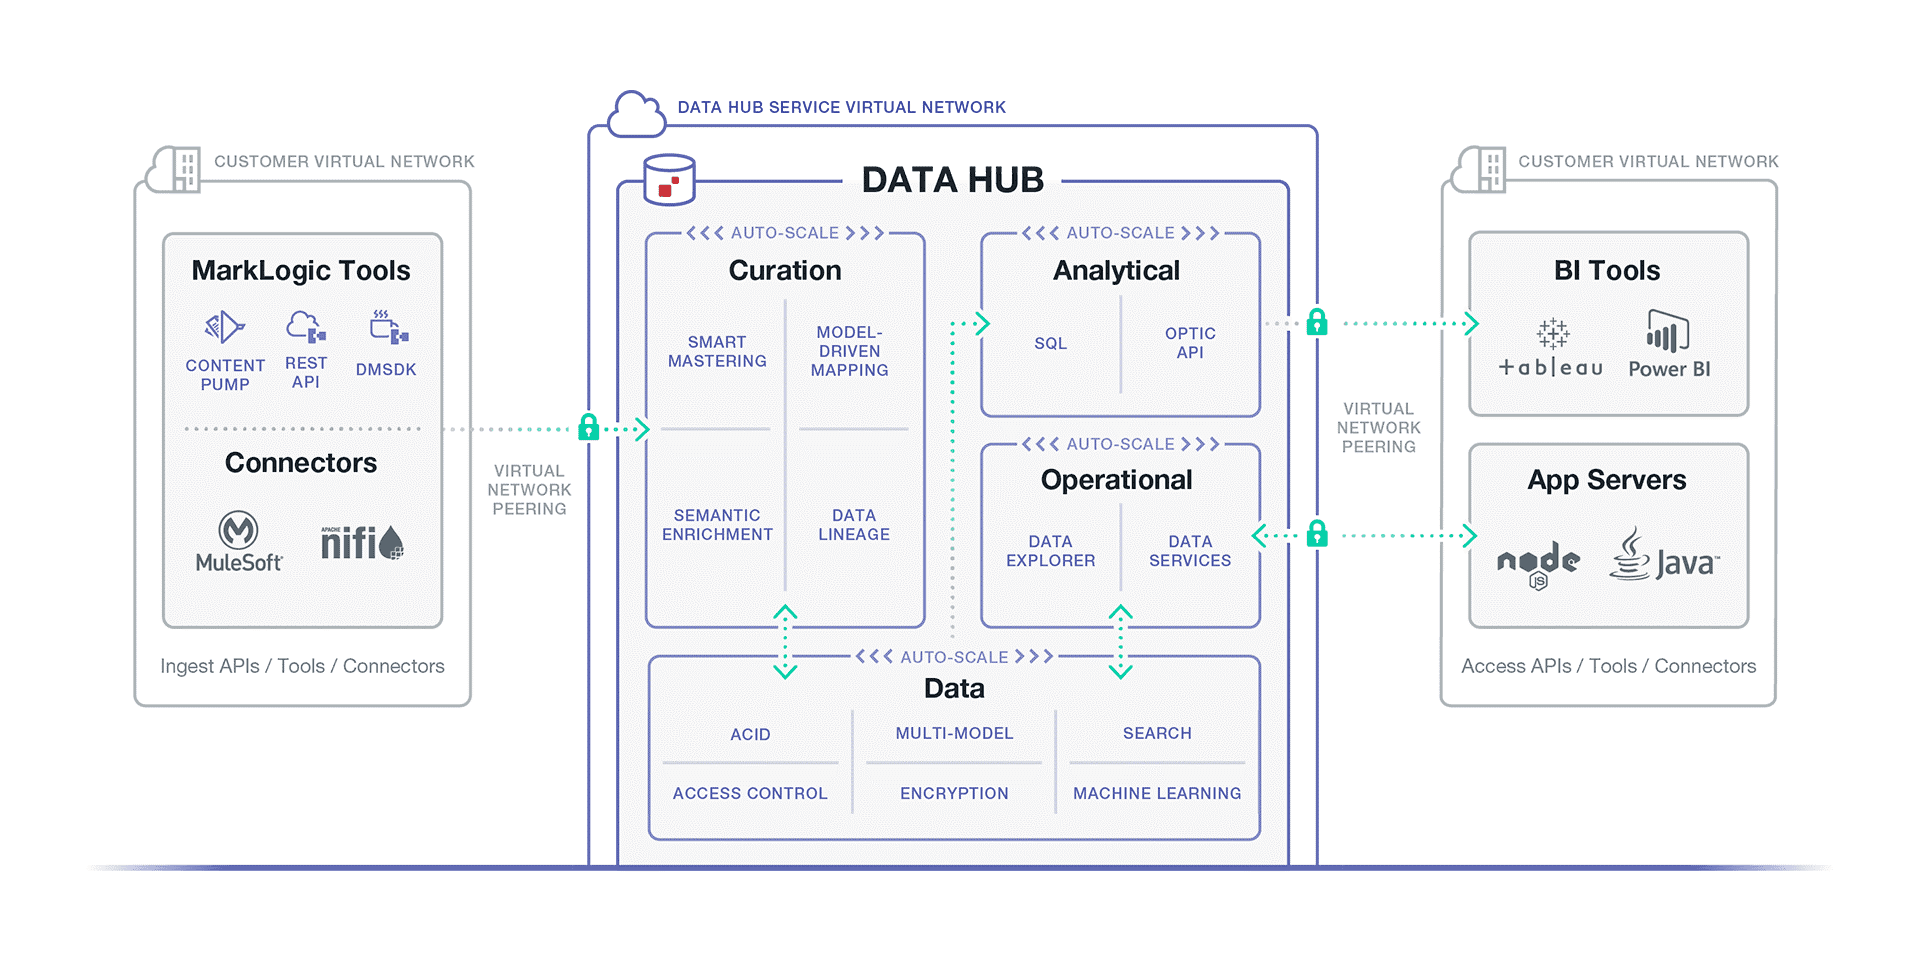 Data Hub Service Architecture Overview